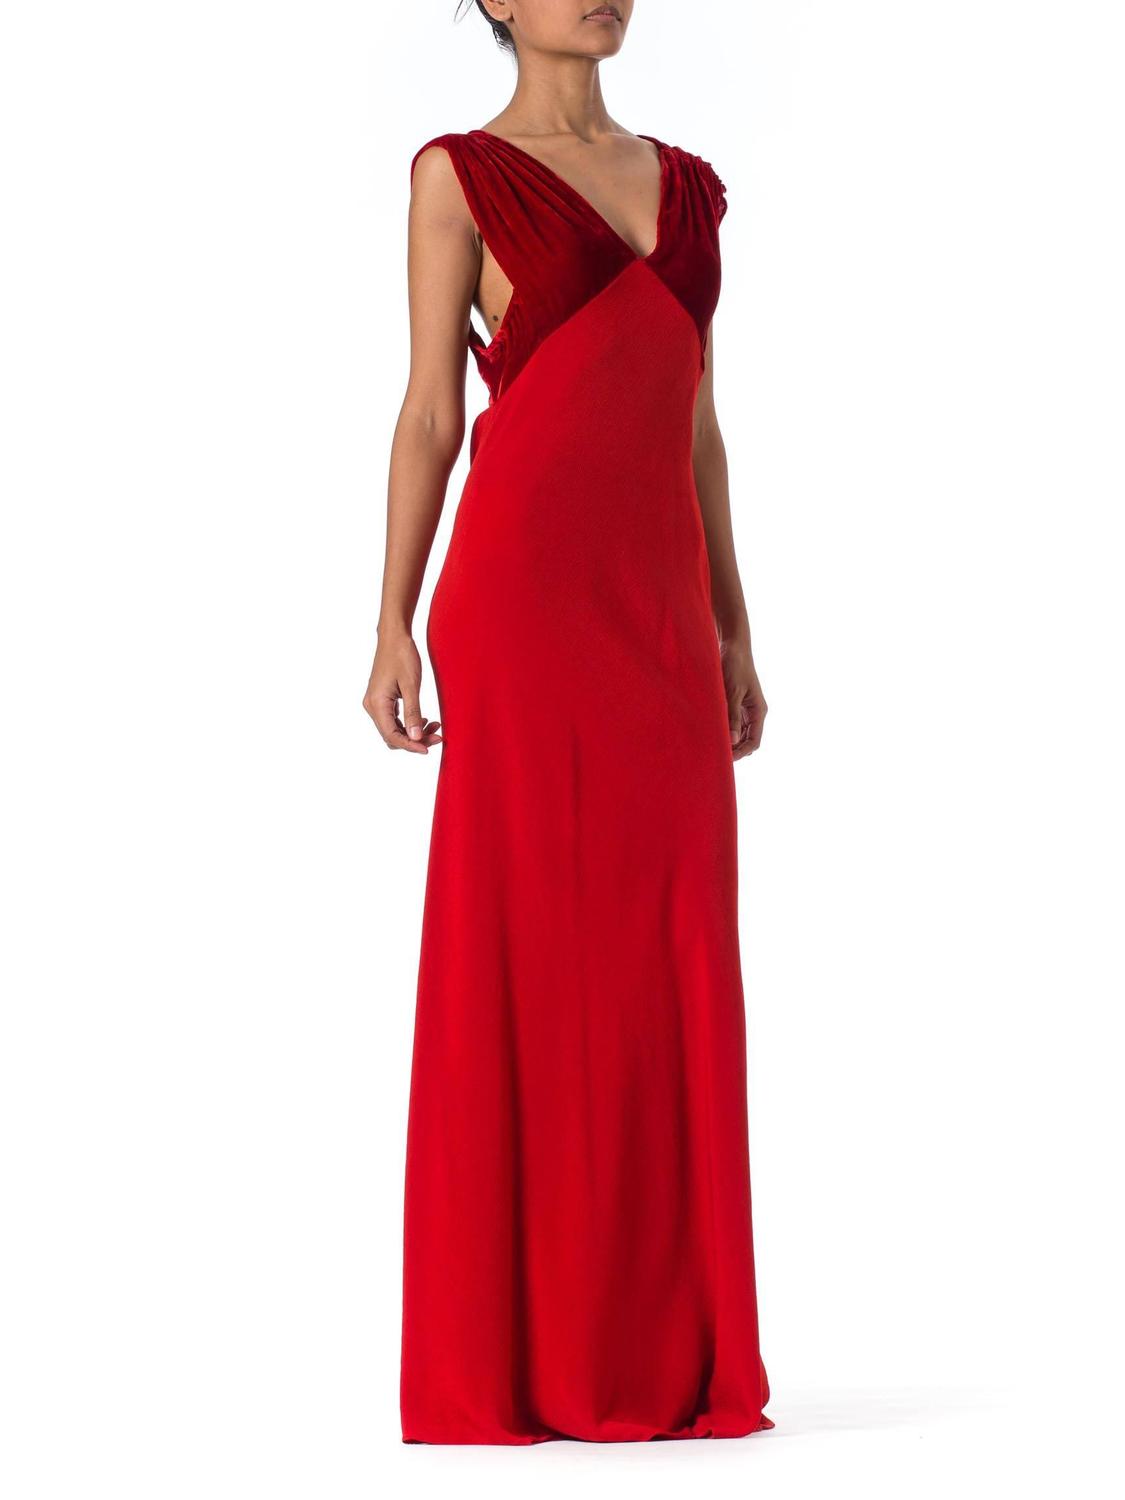 1930s Backless Red Bias Cut Gown For Sale at 1stdibs